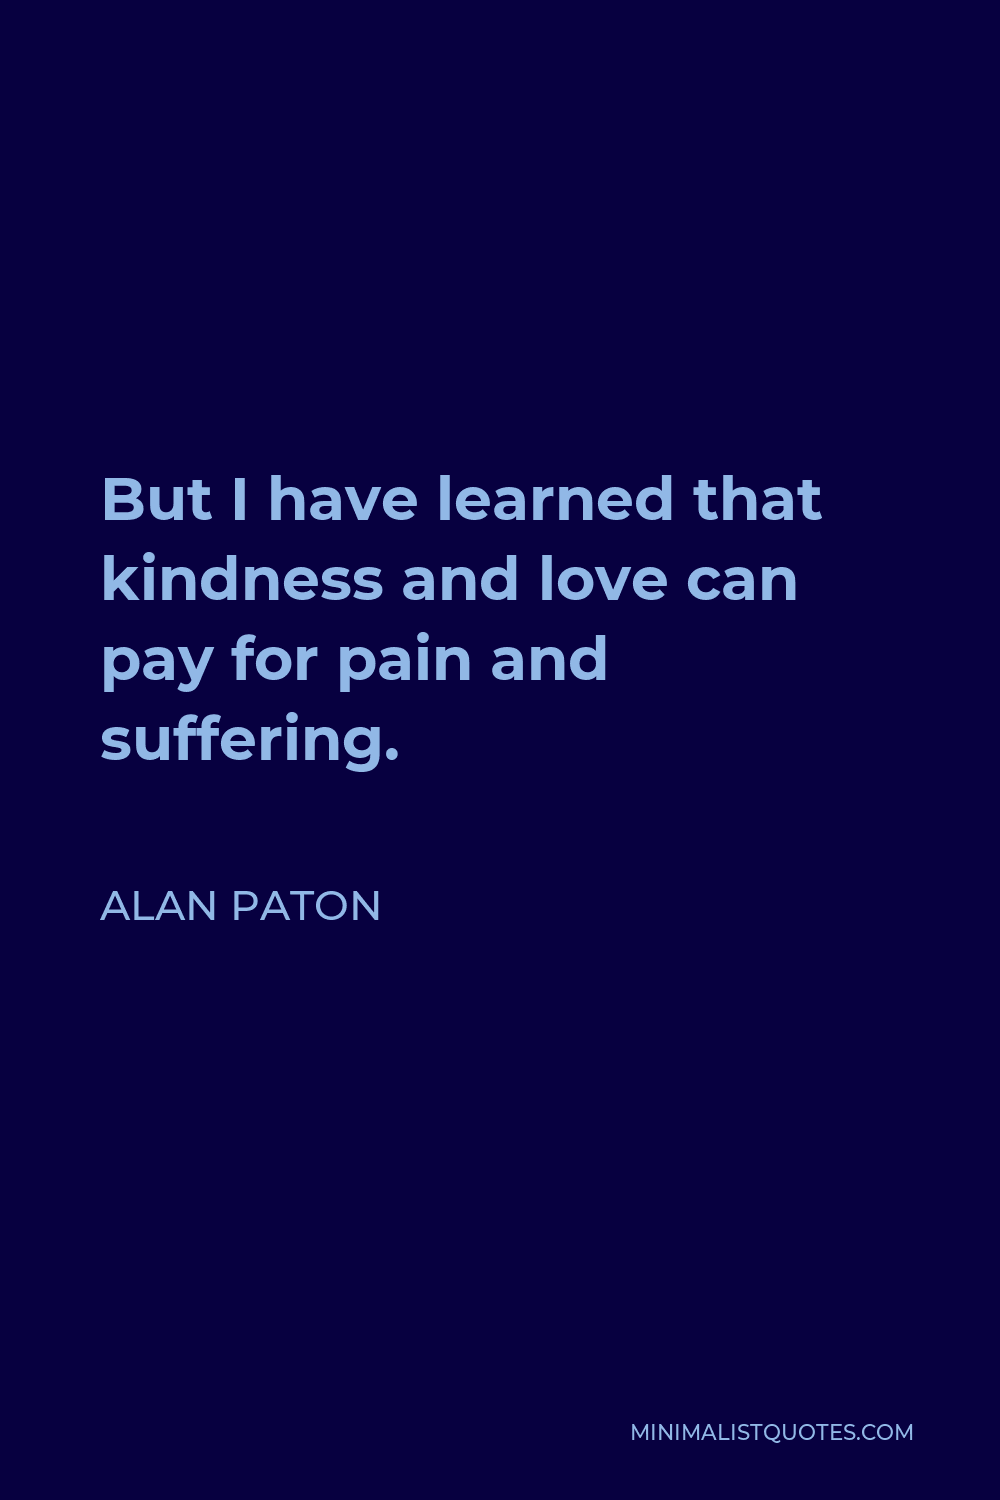 Alan Paton Quote - But I have learned that kindness and love can pay for pain and suffering.